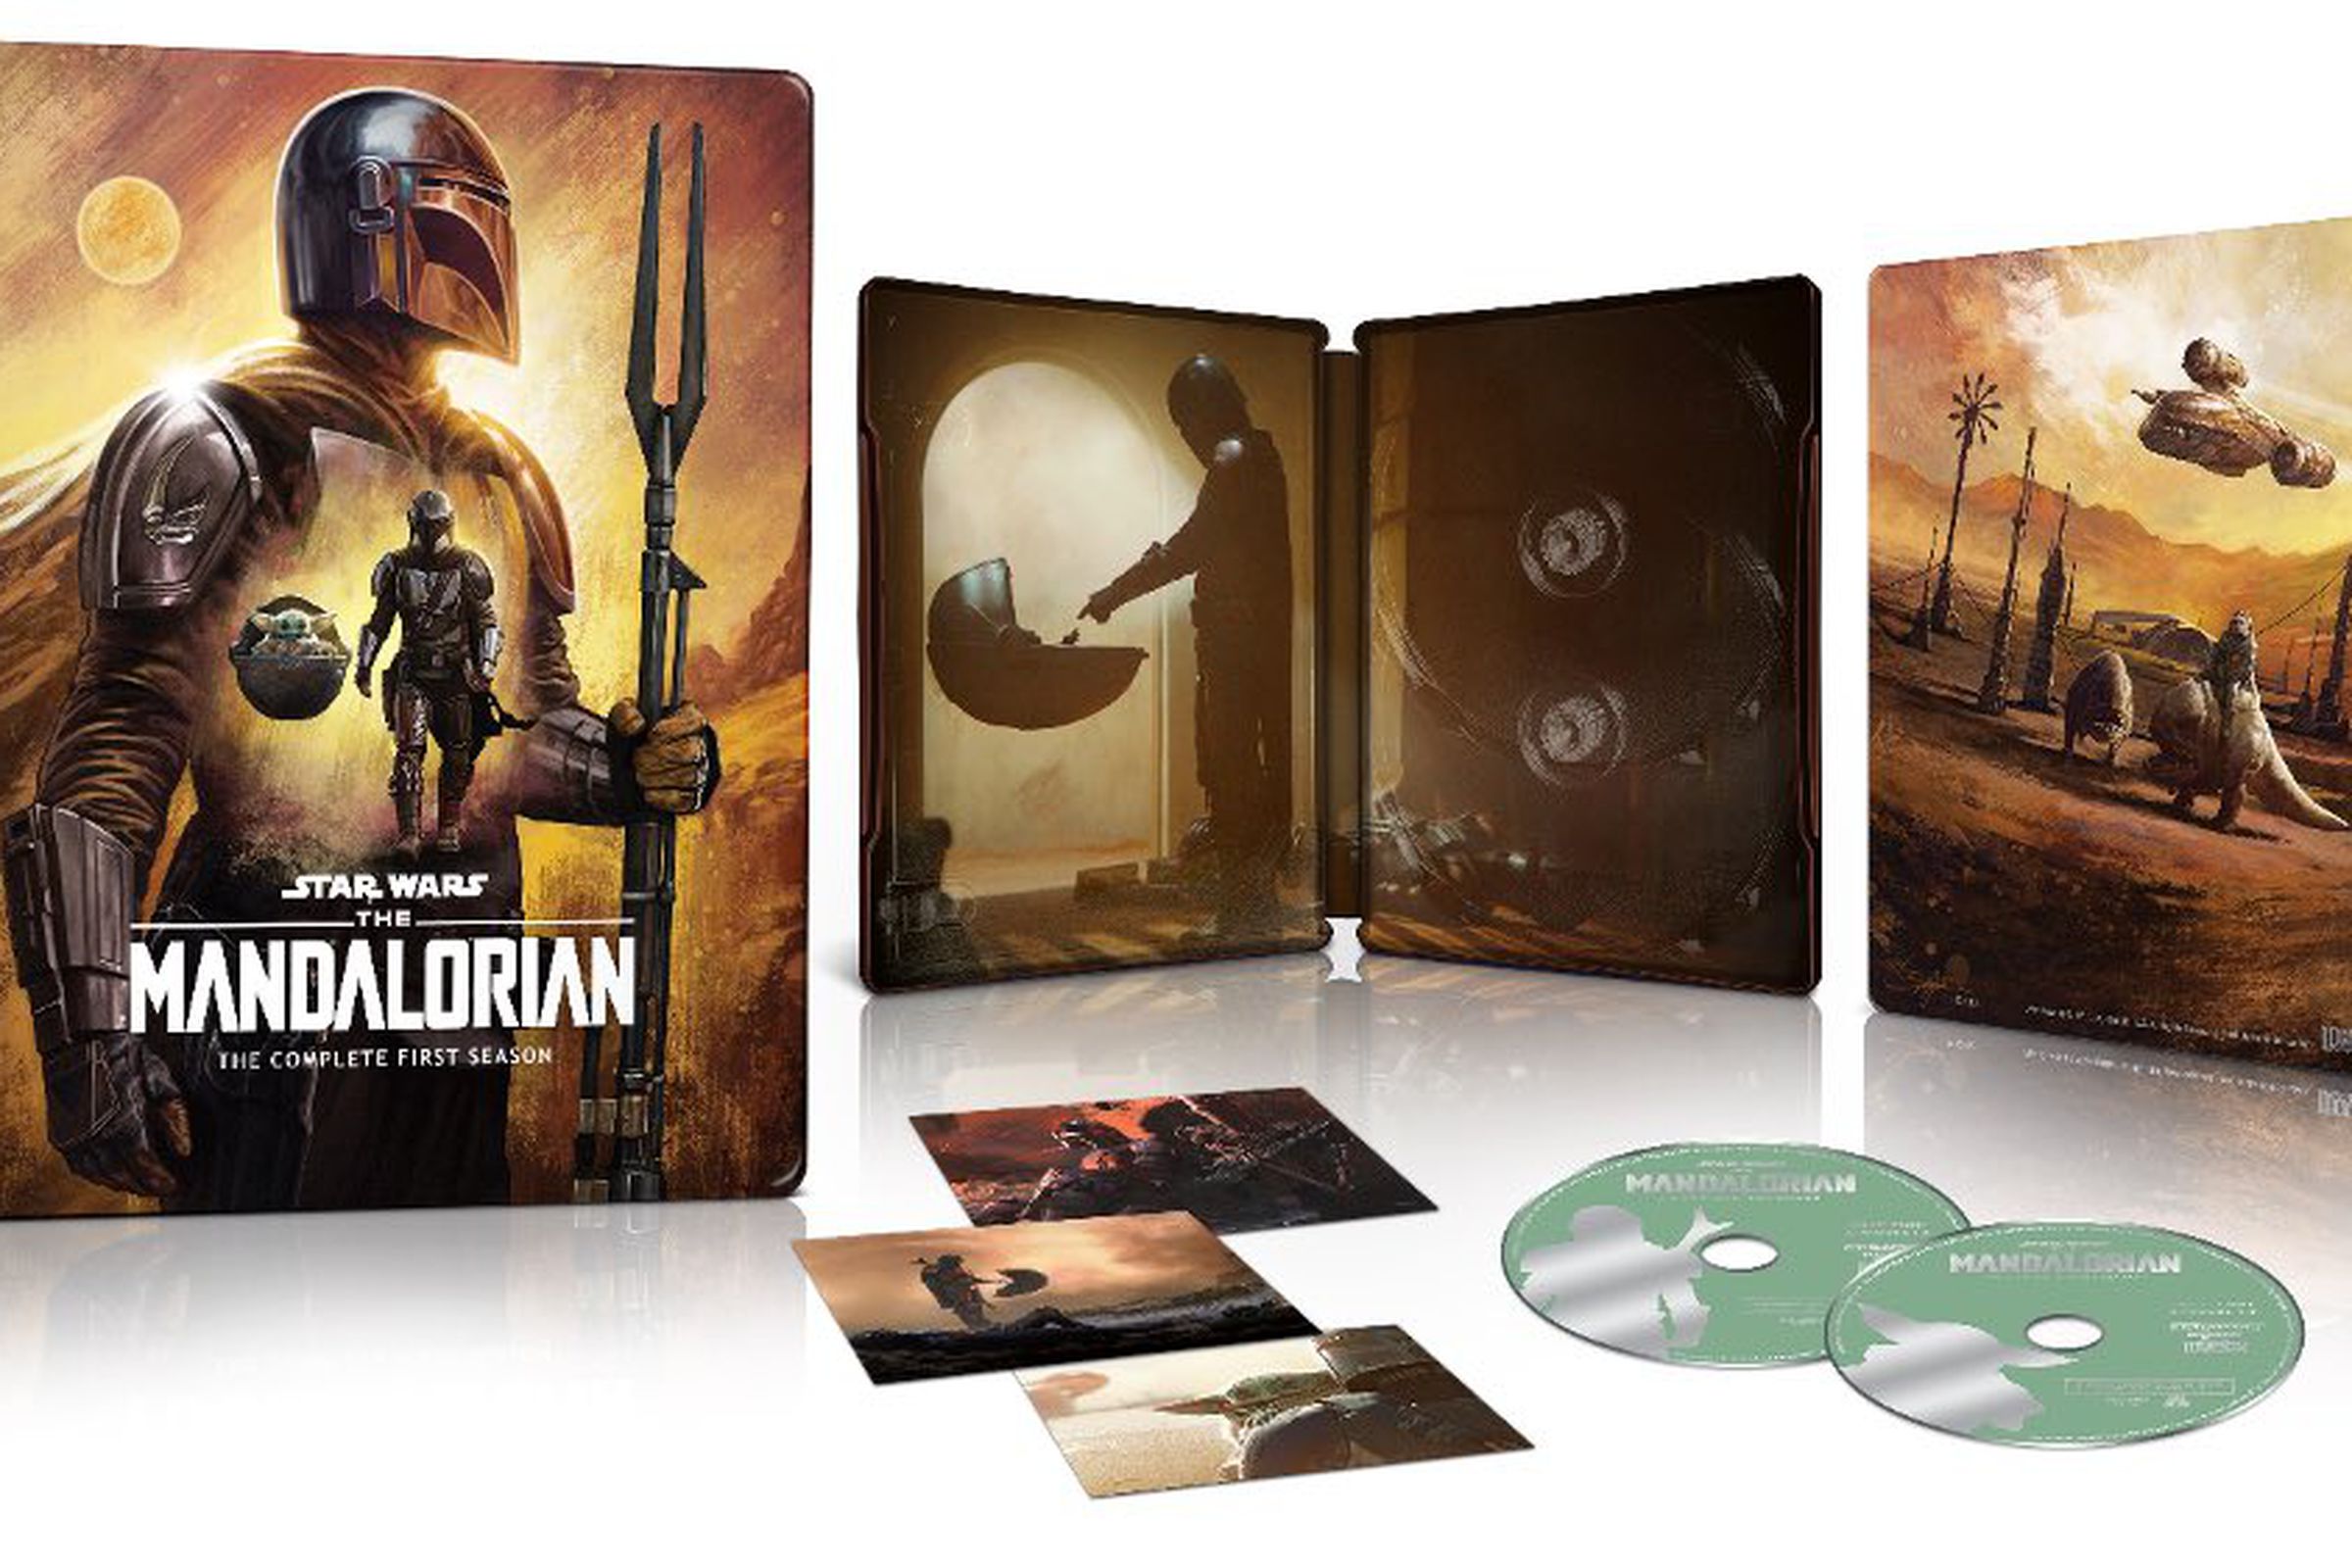 An image showing The Mandalorian on Blu-ray